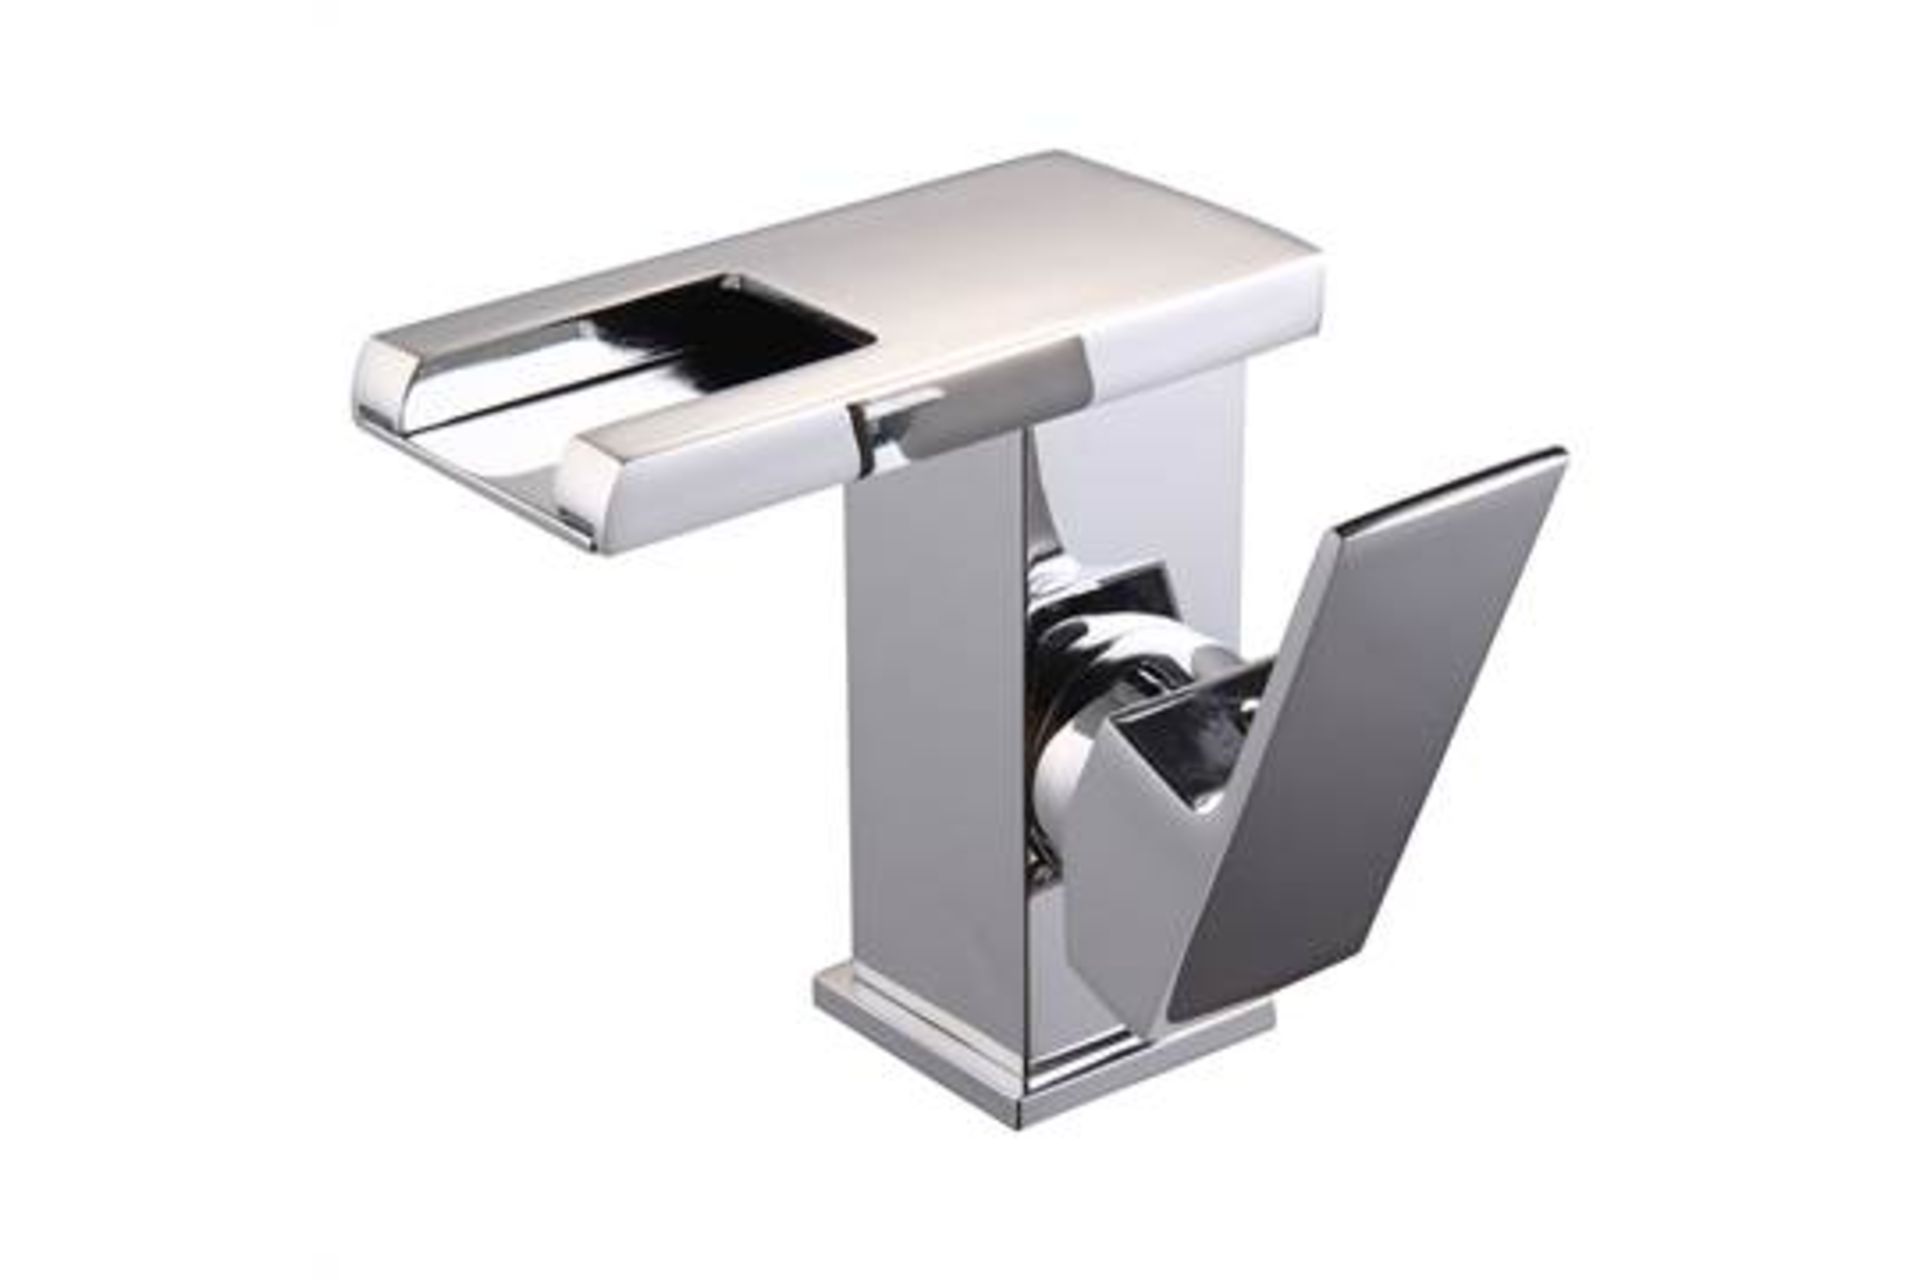 (J198) LED Waterfall Bathroom Basin Mixer Tap. RRP £229.99. Easy to install and clean. All copper - Image 3 of 3